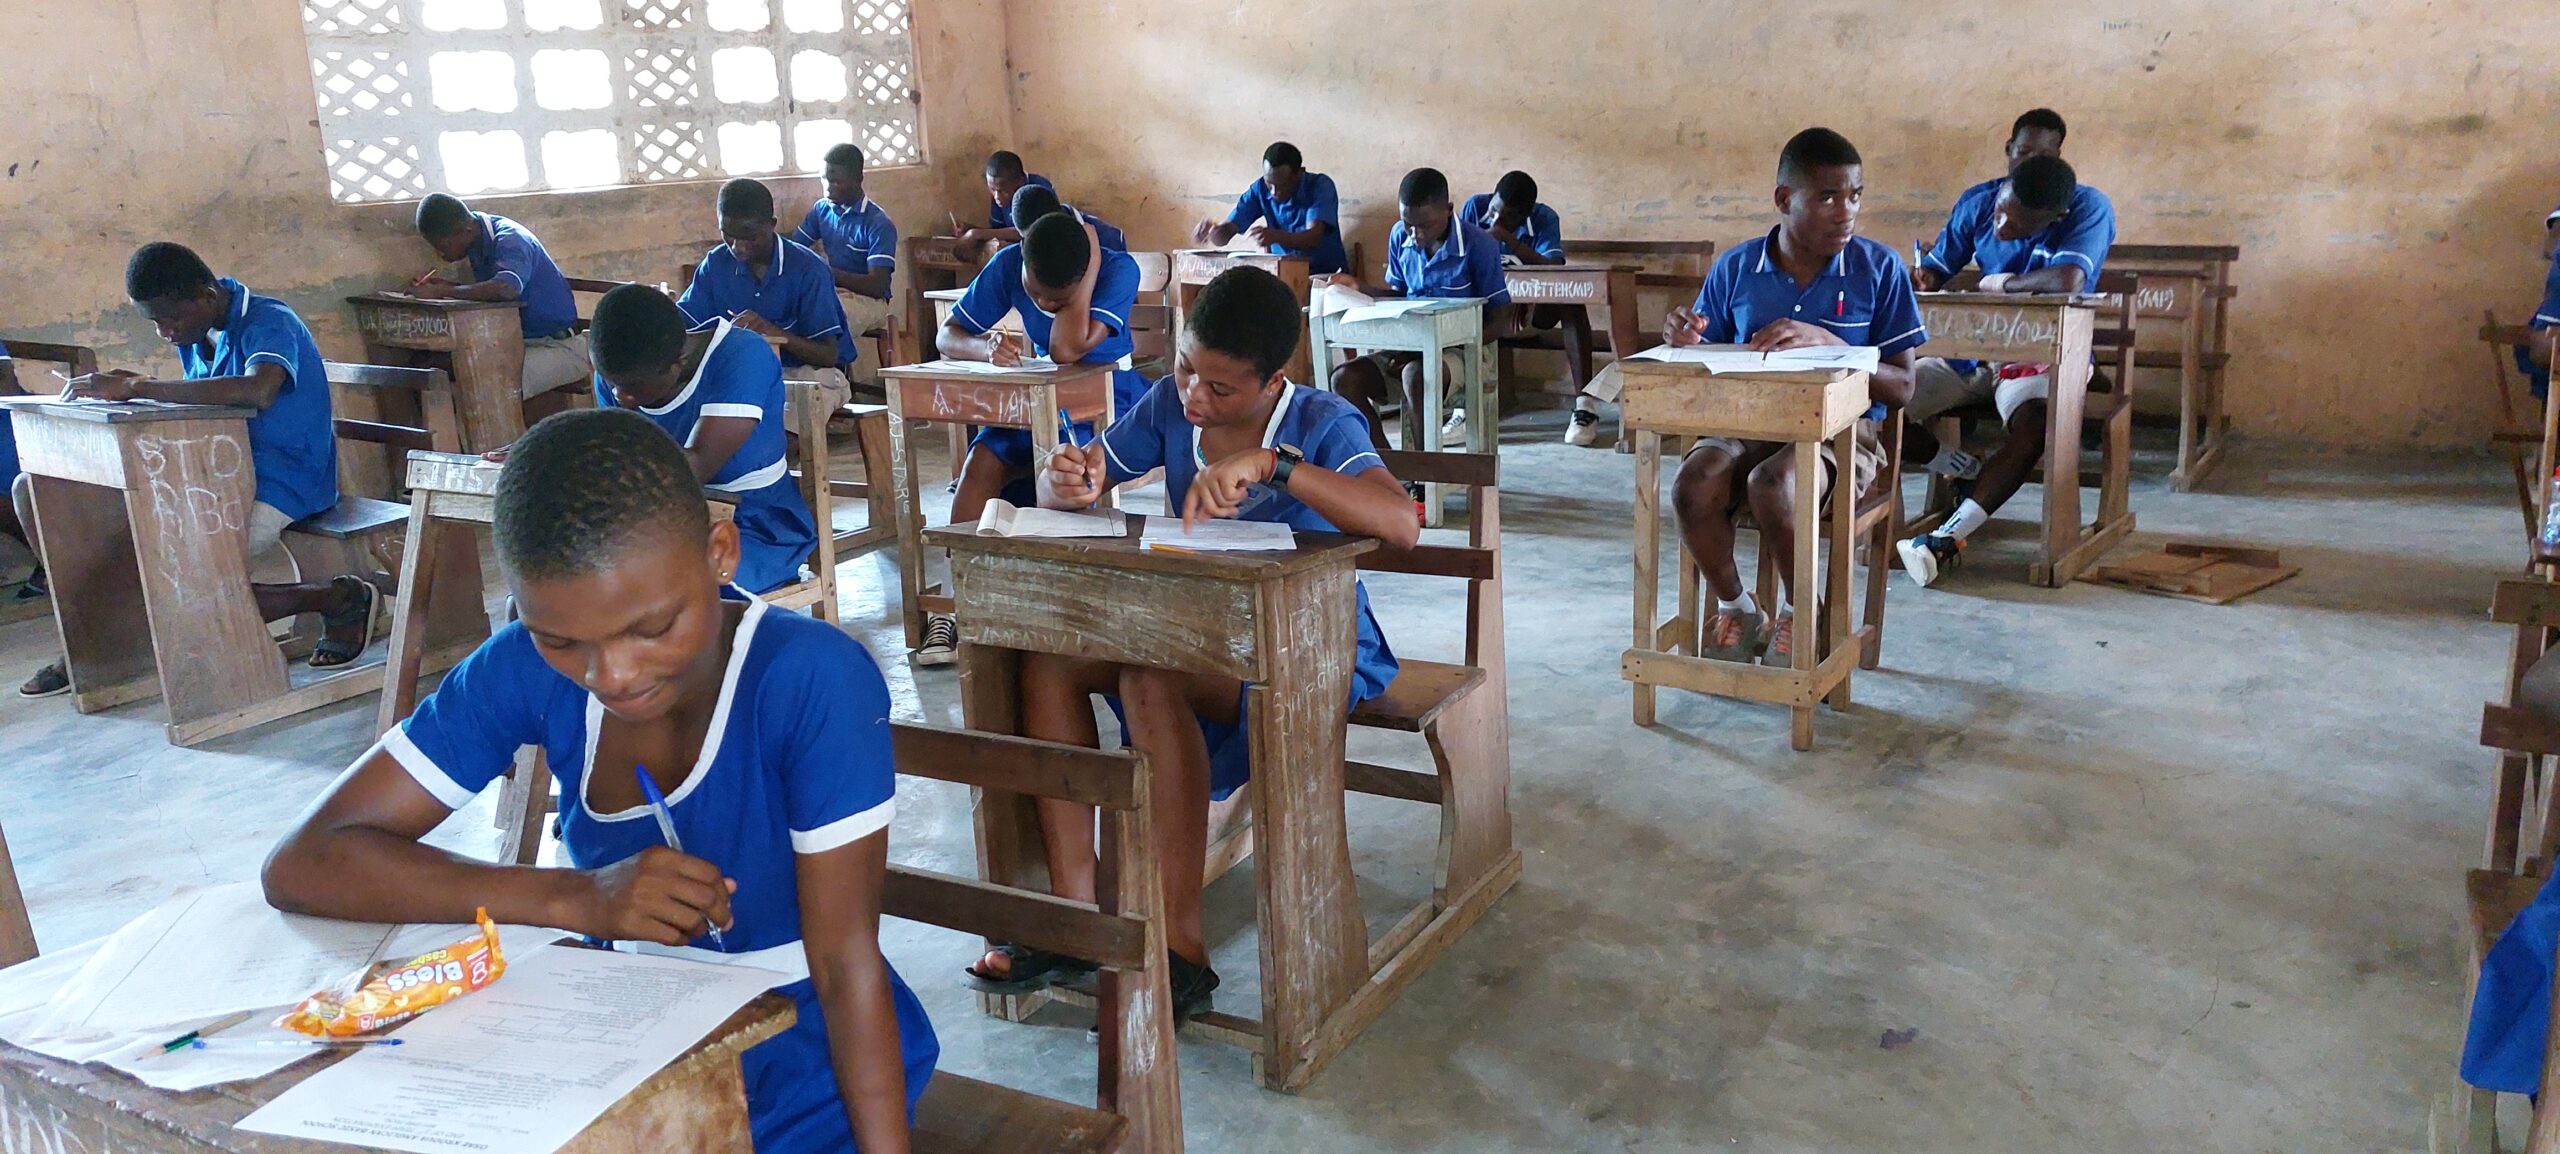 cluster BECE write 20 GES 4 school PRIVATE term